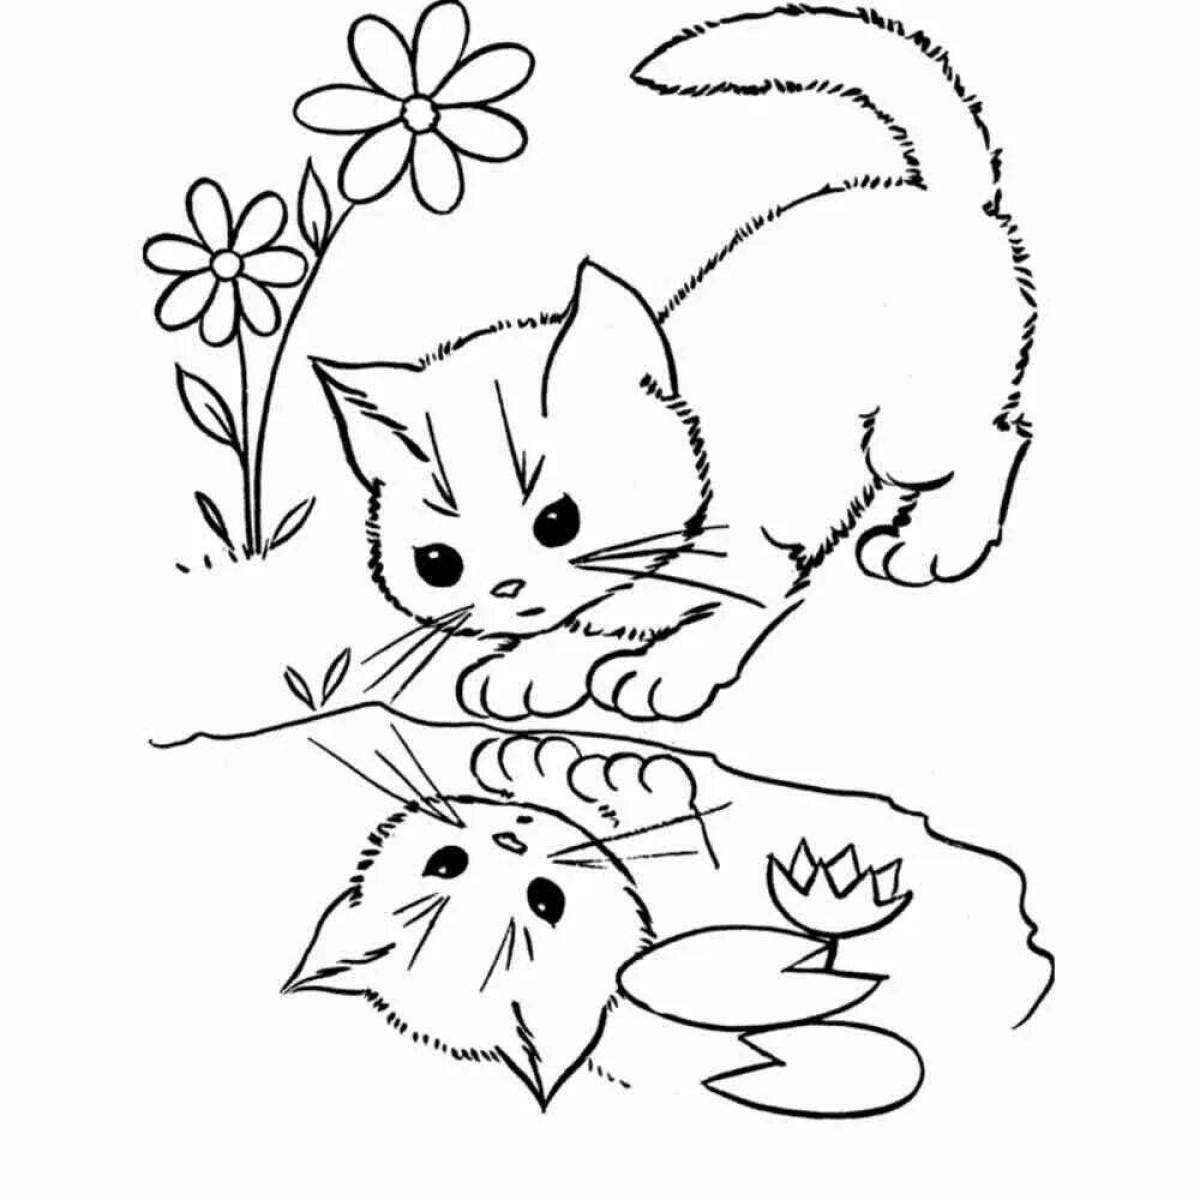 Fluffy cat coloring book